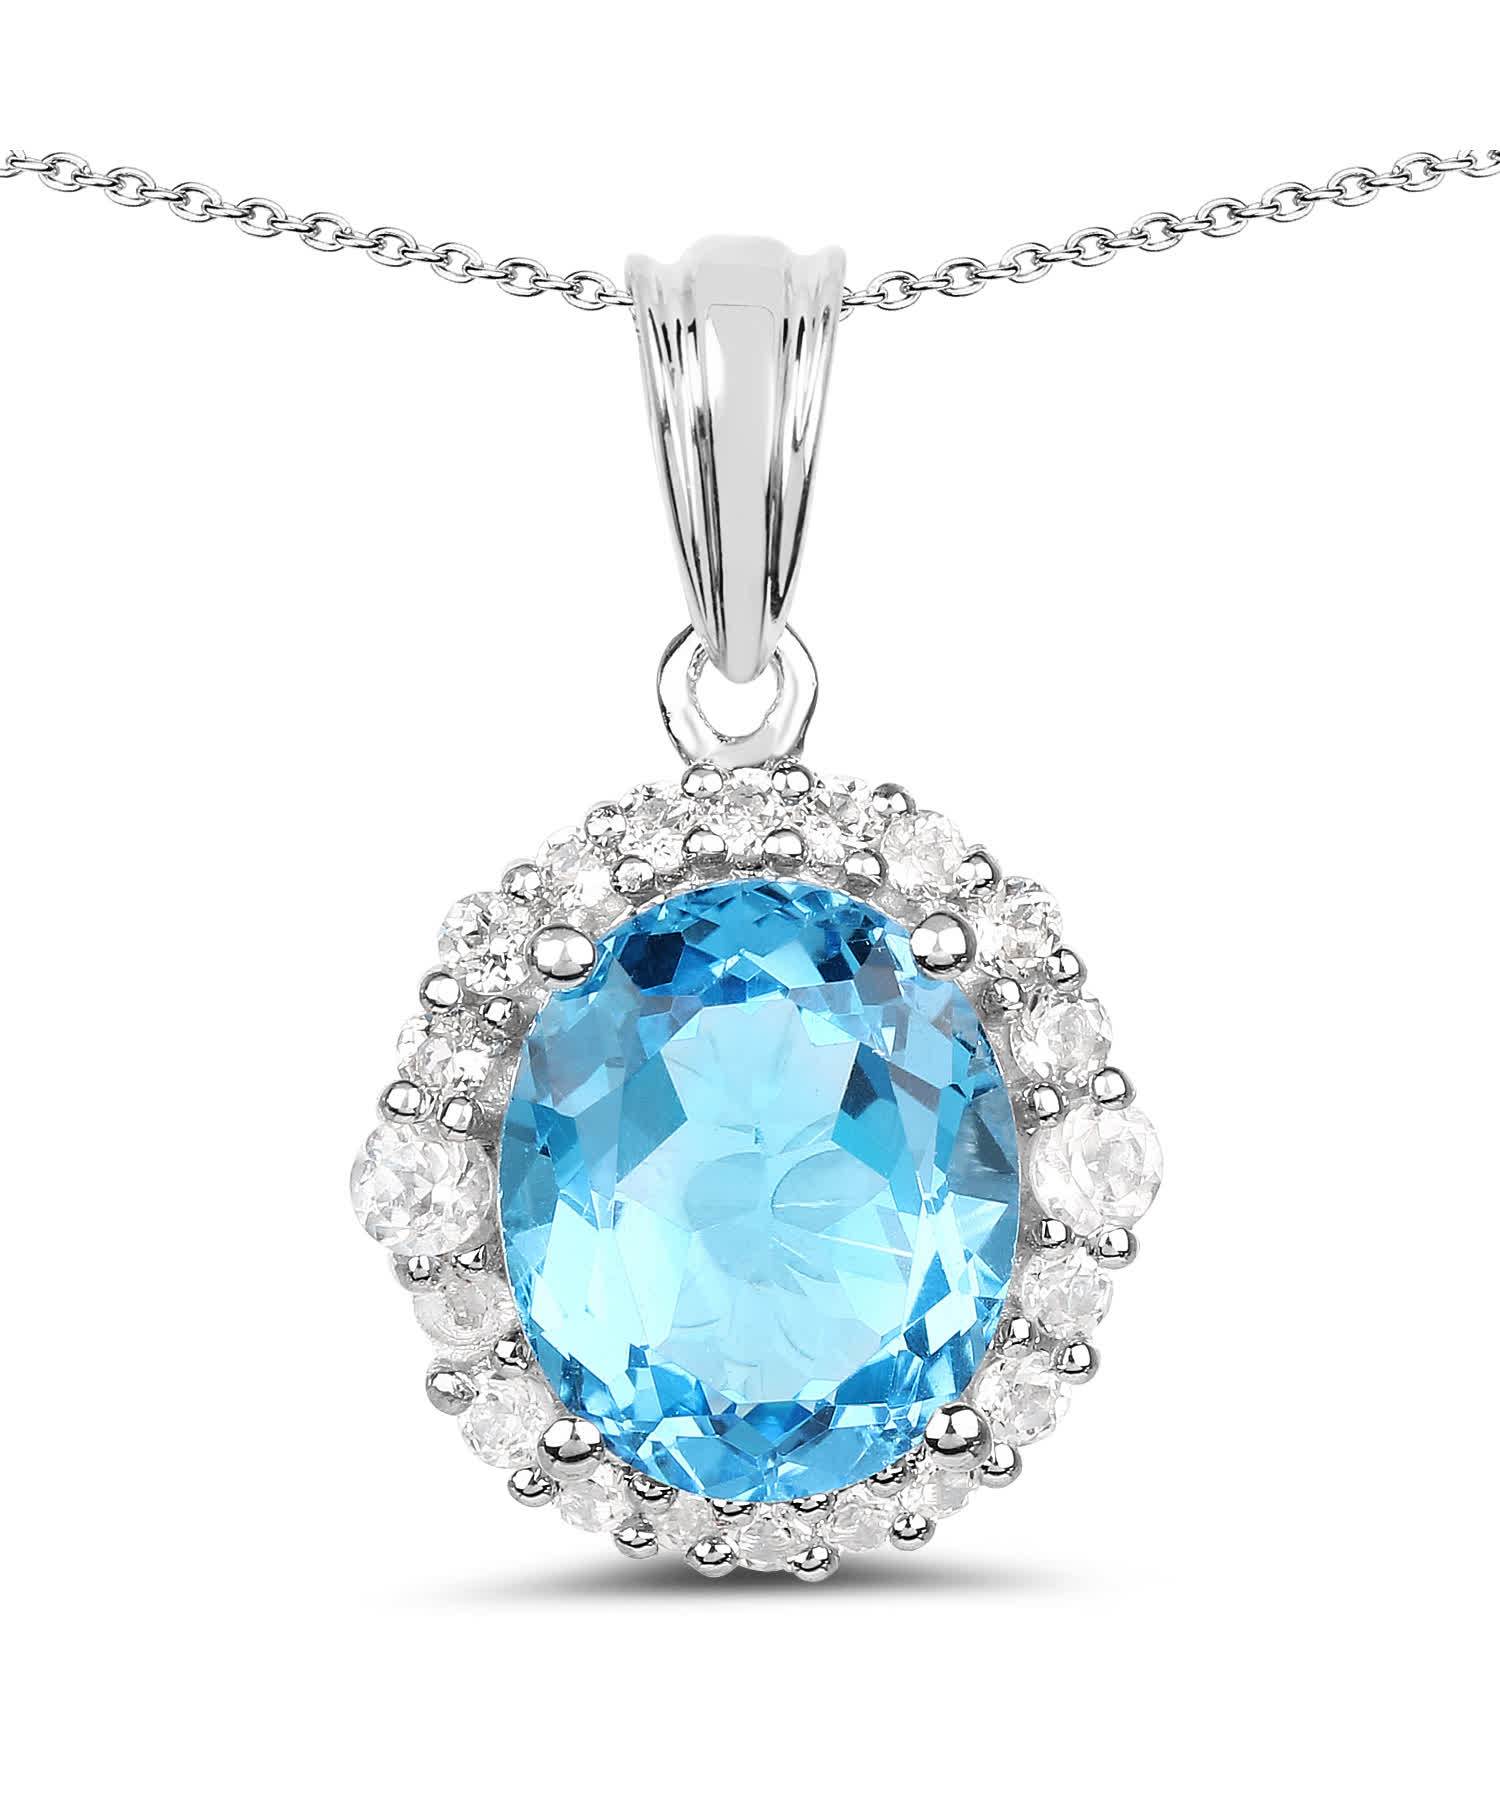 6.12ctw Natural Swiss Blue Topaz Rhodium Plated 925 Sterling Silver Halo Pendant With Chain View 1